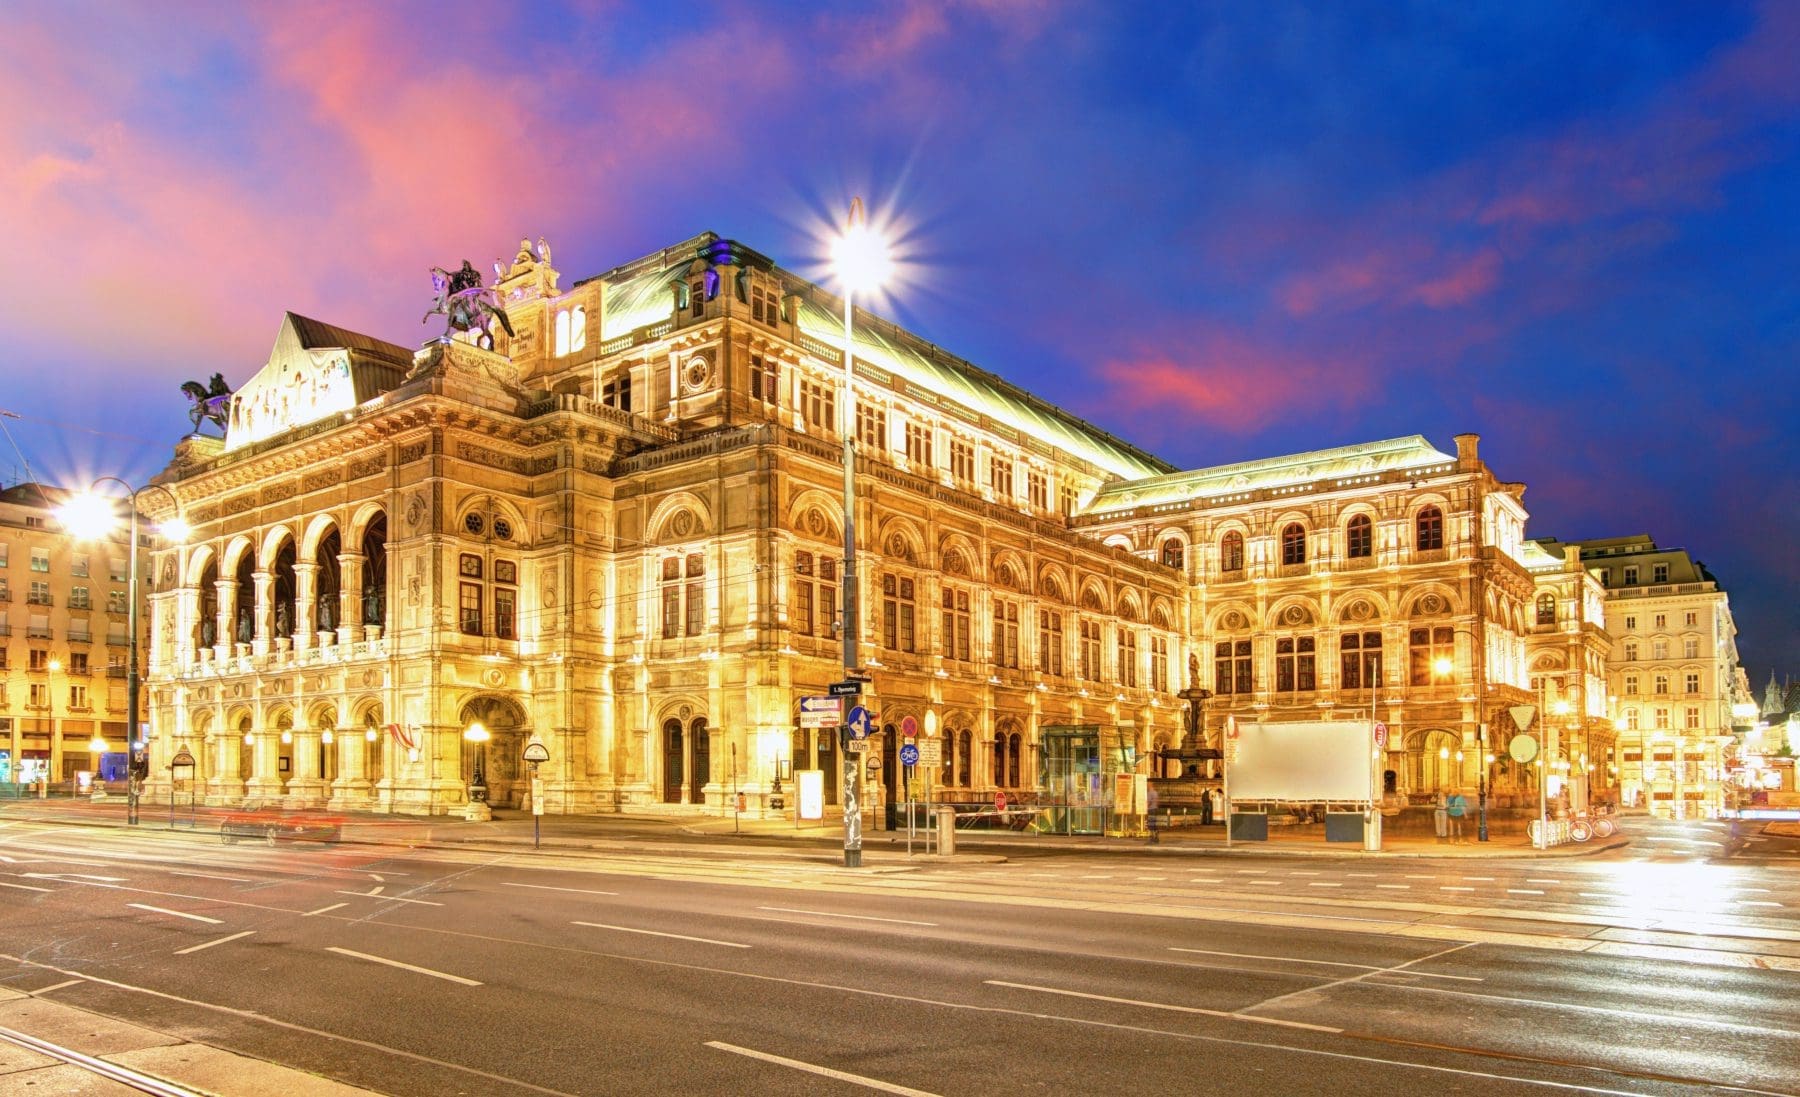 The Vienna Casino Offering European Elegance to Players